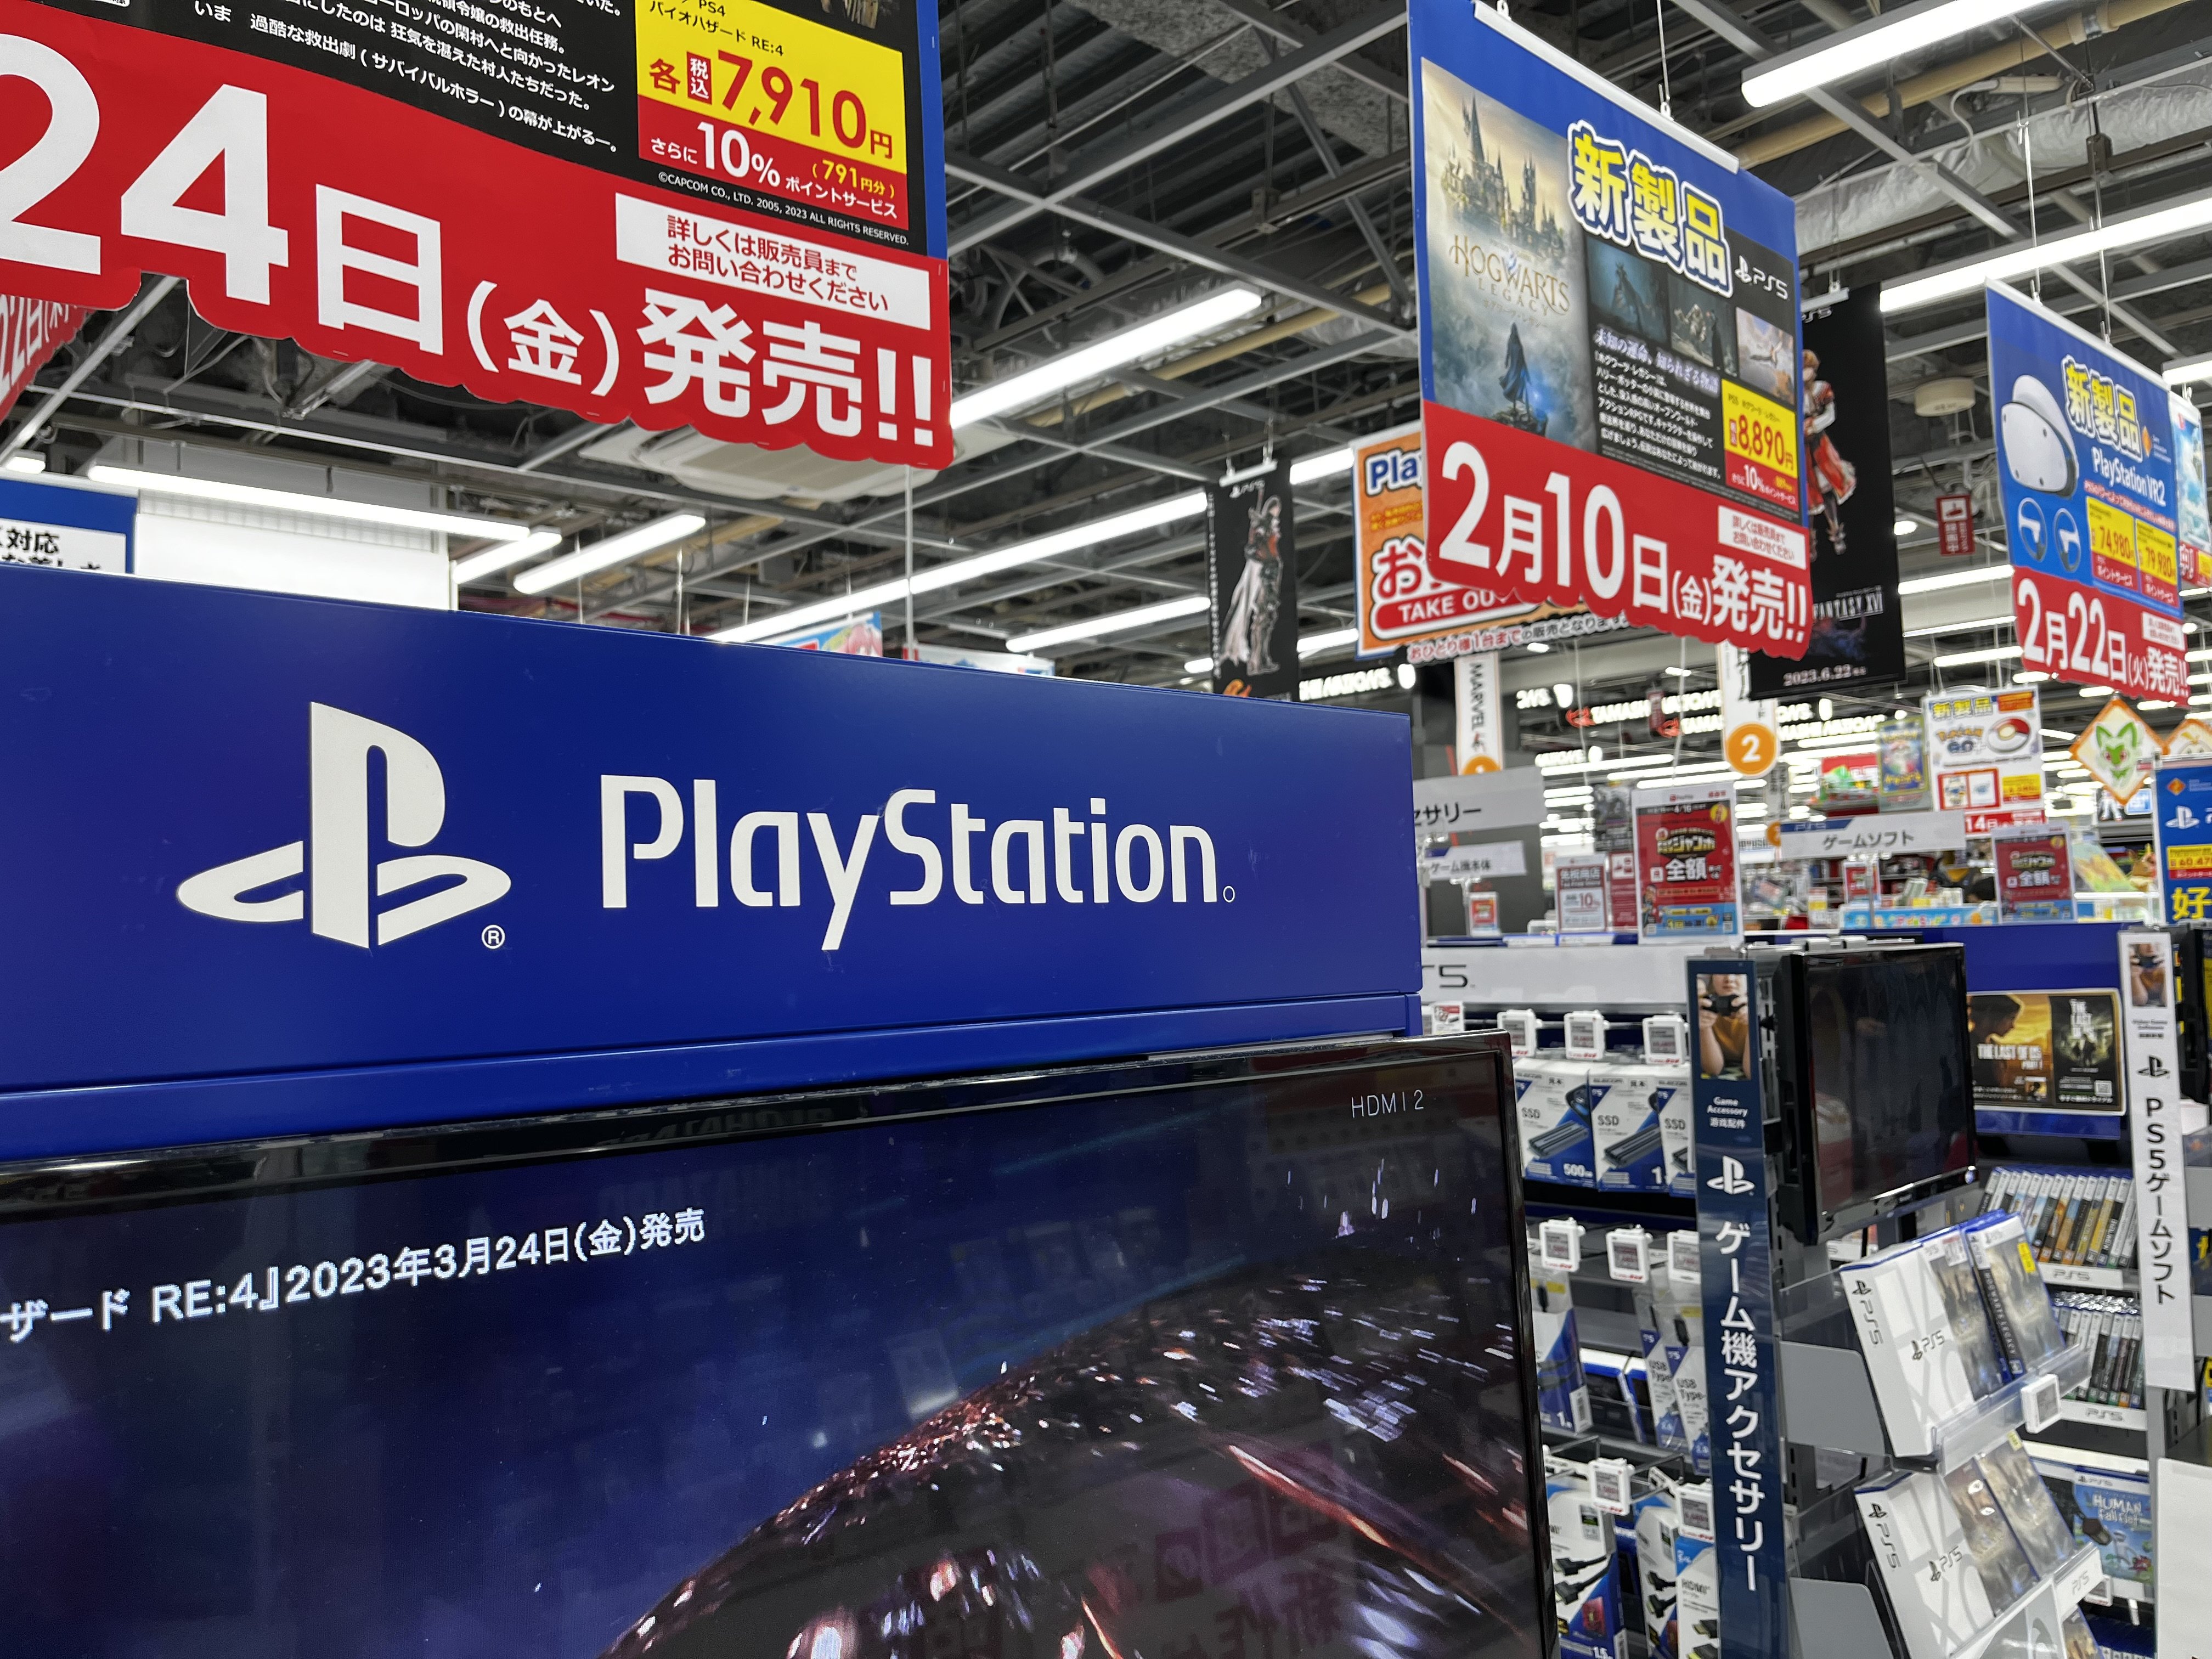 Bad News PlayStation Plus Fans, Sony Hikes Prices Of Annual Subscription  Across All Tiers - Gizmochina